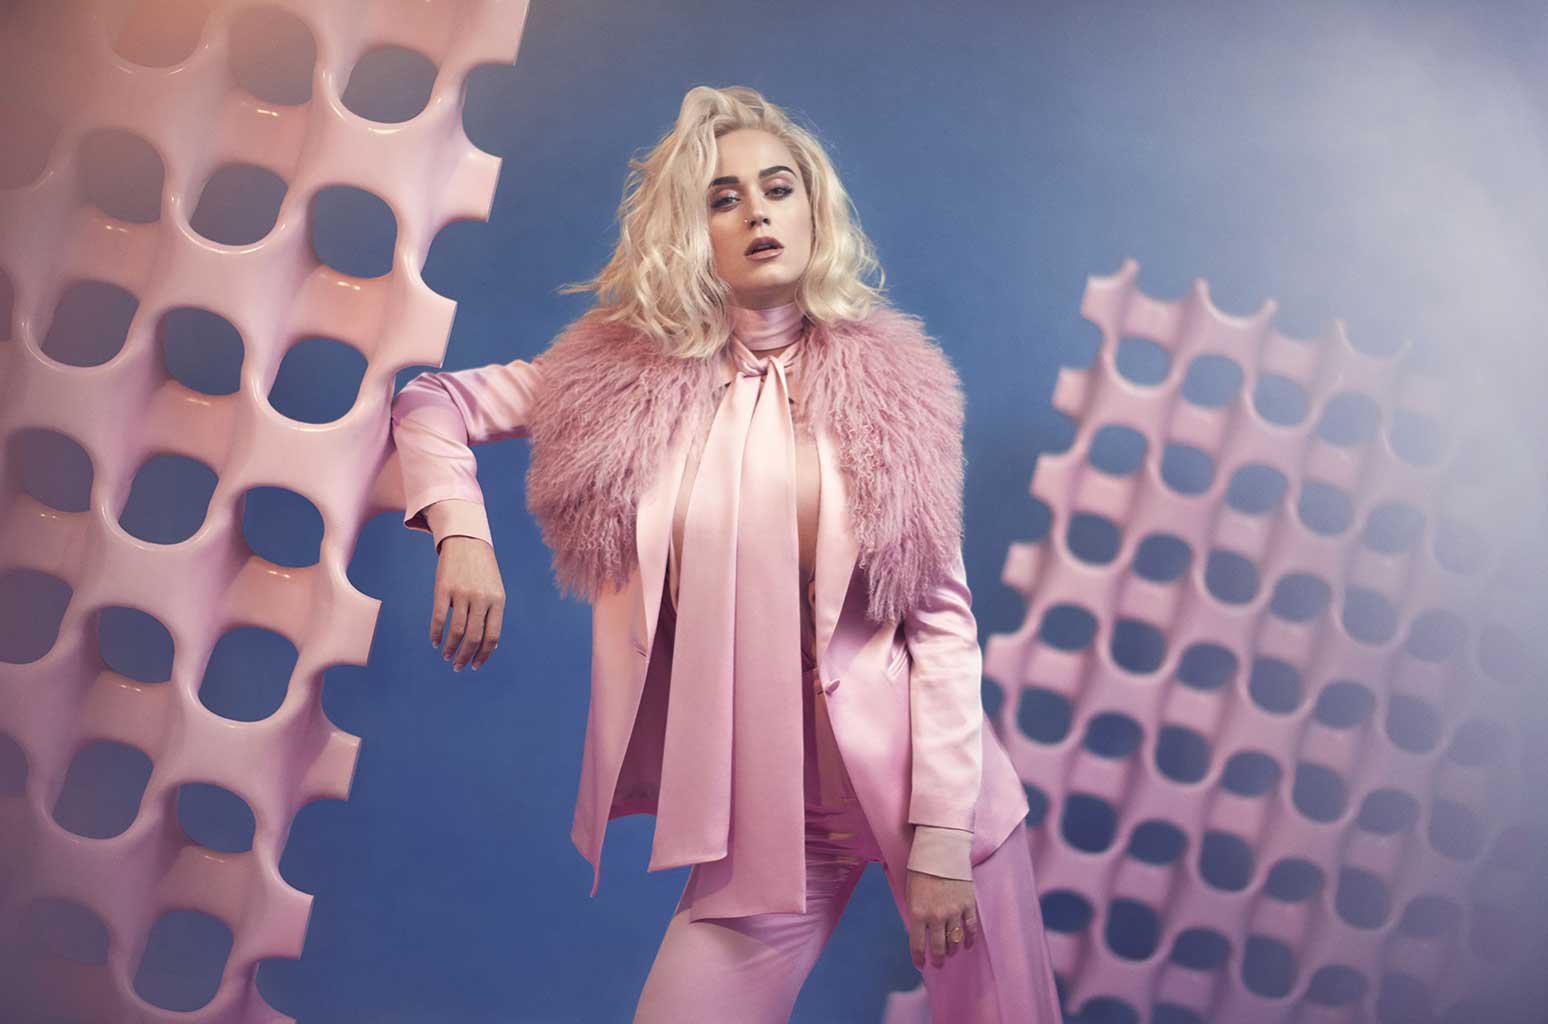 Katy Perry estrena video para "Chained To The Rhythm". Cusica plus